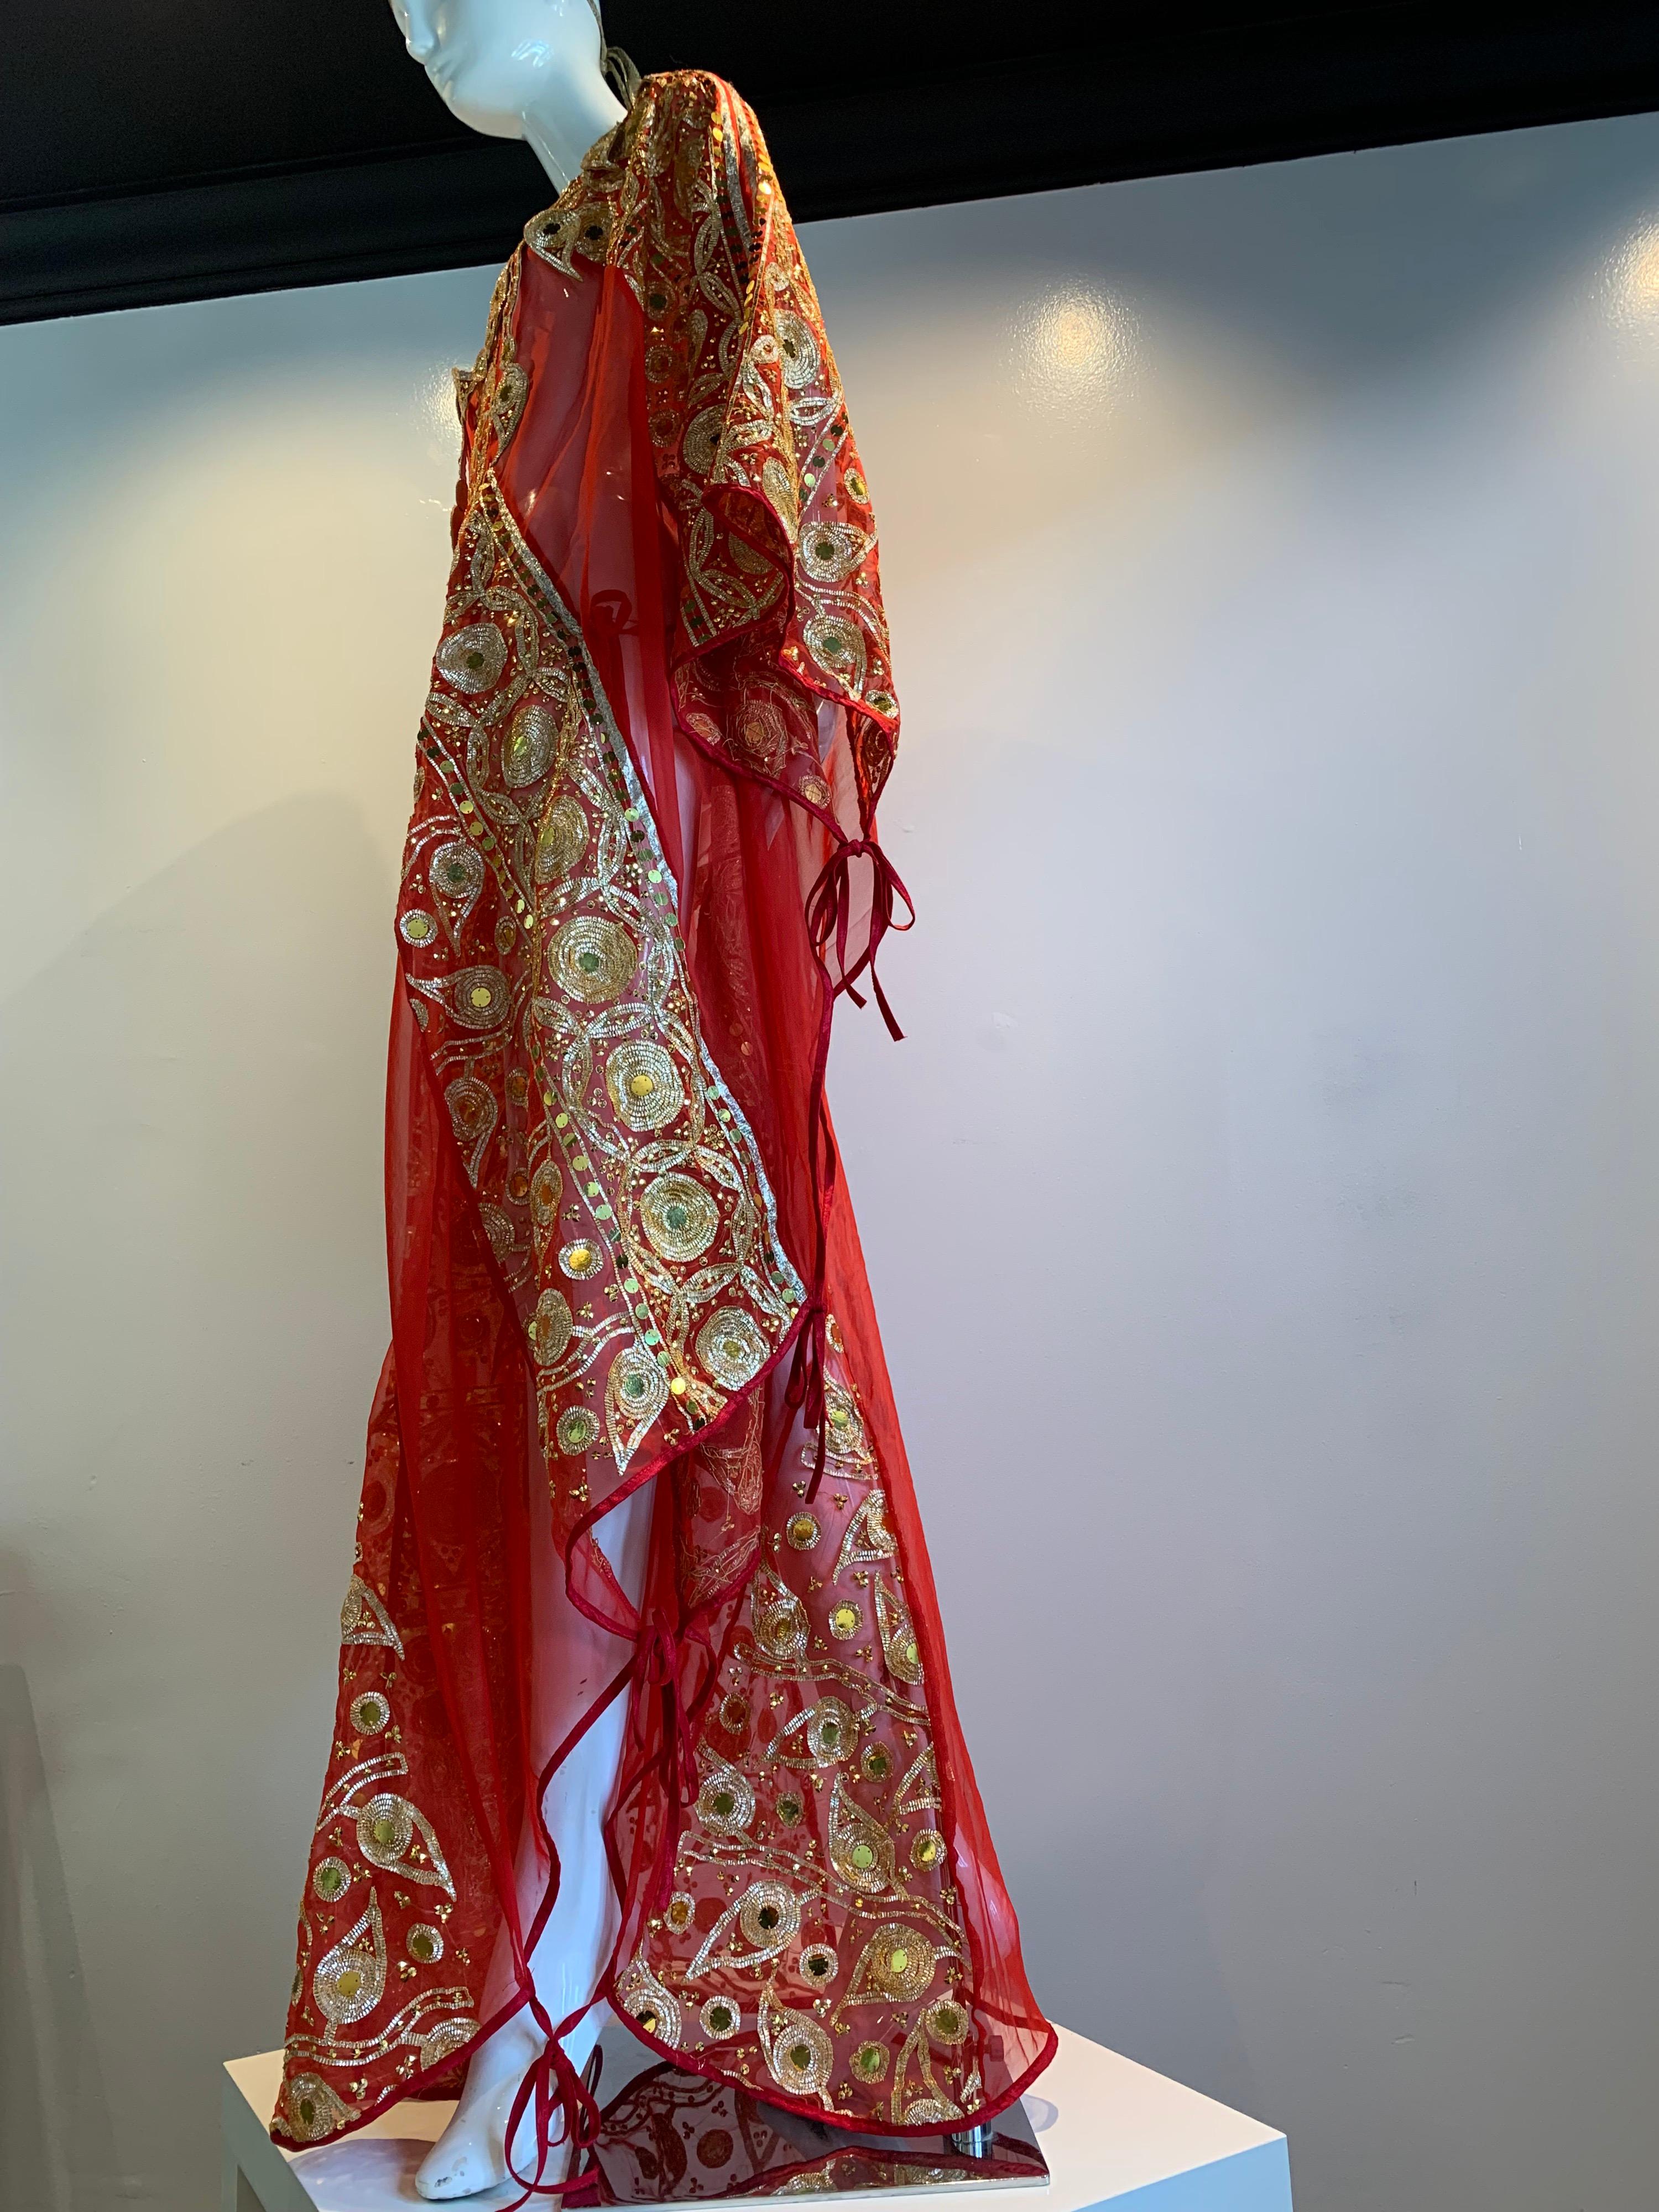 Torso Creations Red Silk Chiffon Caftan Heavily Embroidered W/ Gold & Sequins For Sale 10